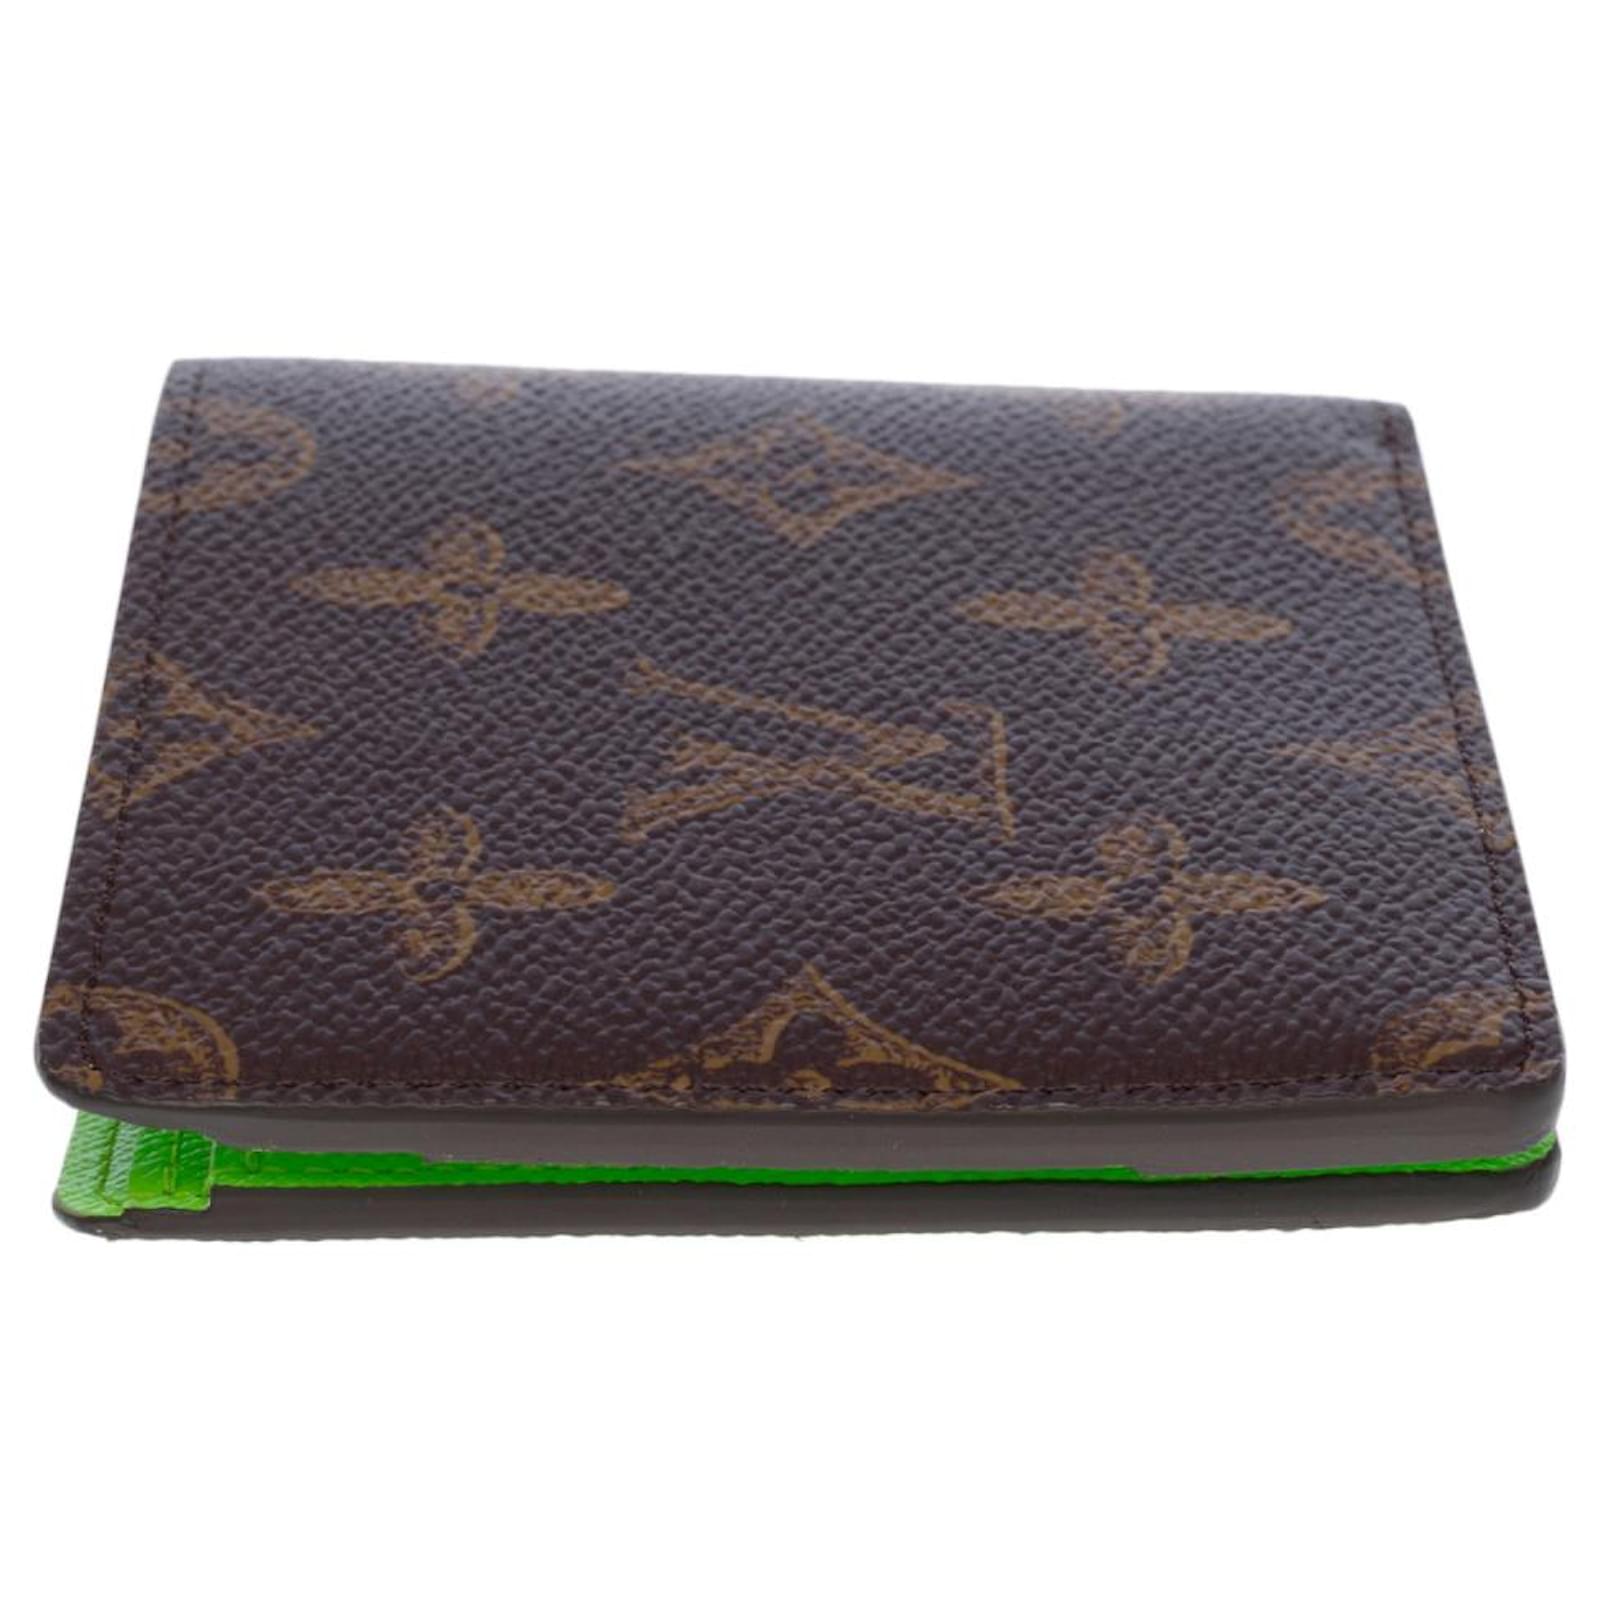 New-Virgil Abloh FW 2022-Multiple Wallet N°7 in brown canvas an green  leather at 1stDibs